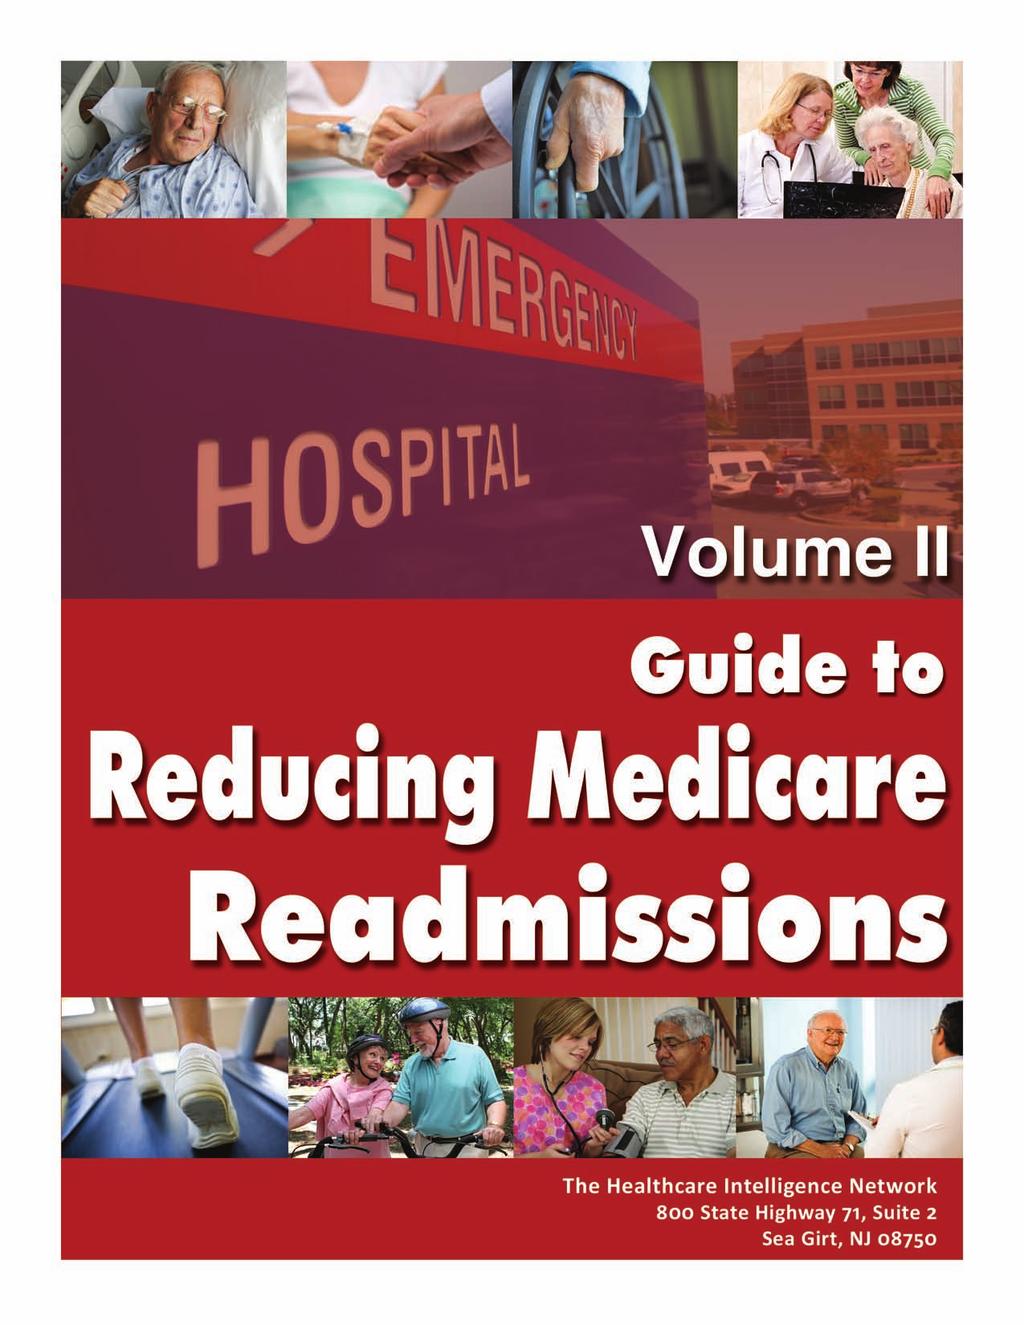 Note: This is an authorized excerpt from the Guide to Reducing Medicare Readmissions, Vol. II.